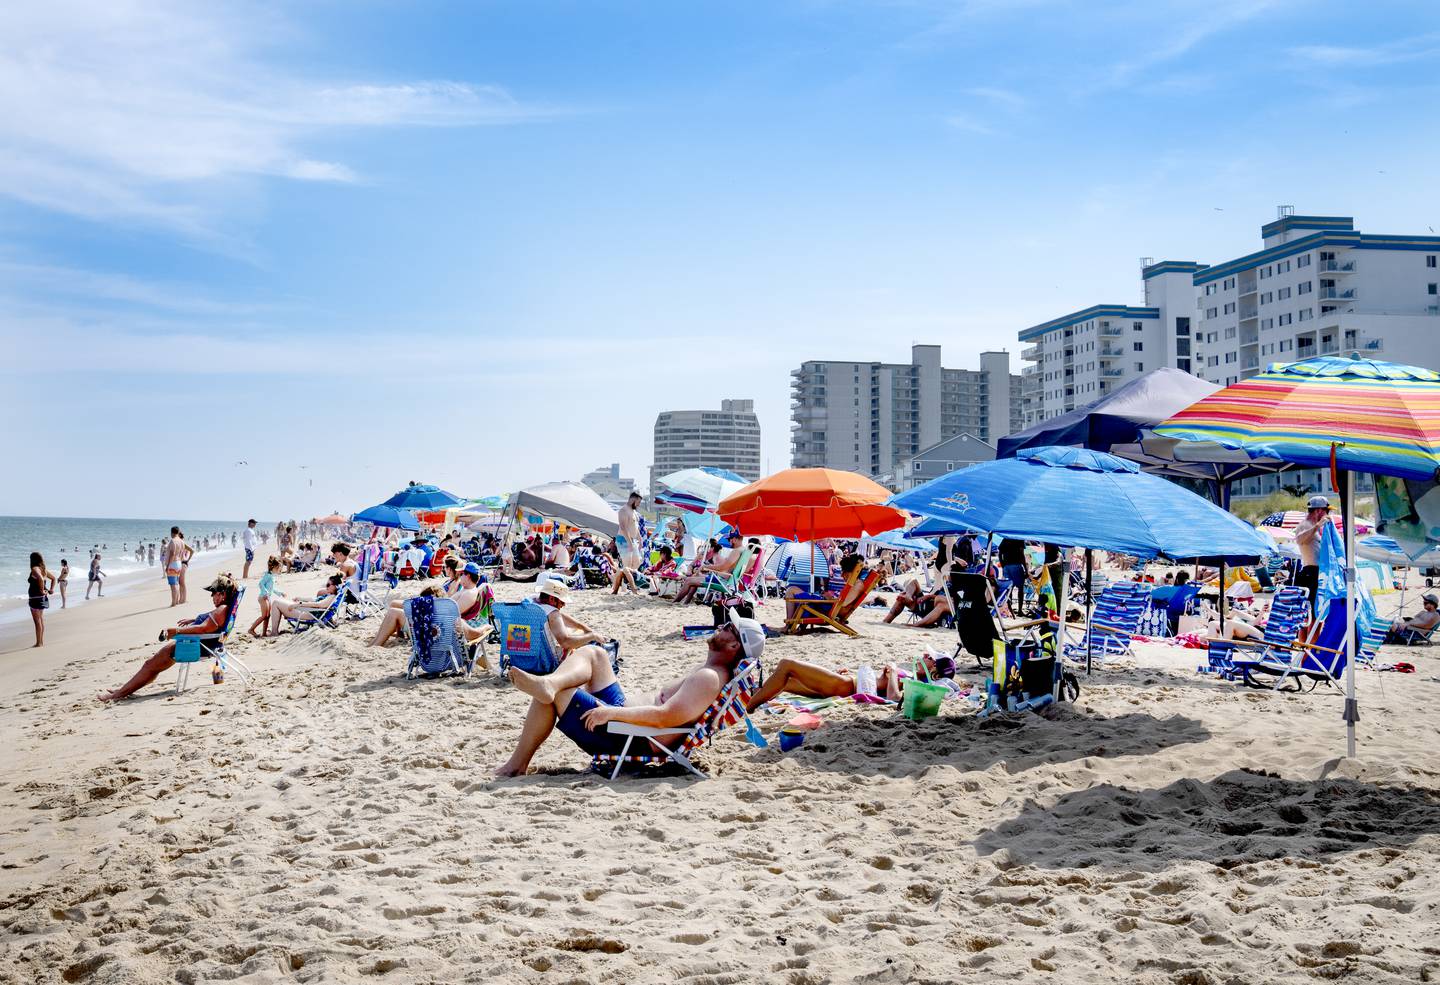 People enjoy the day at Ocean City Beach on Saturday, Aug. 12, 2023. The city is considering regulations on tents and canopies on the beach after the 2023 season.